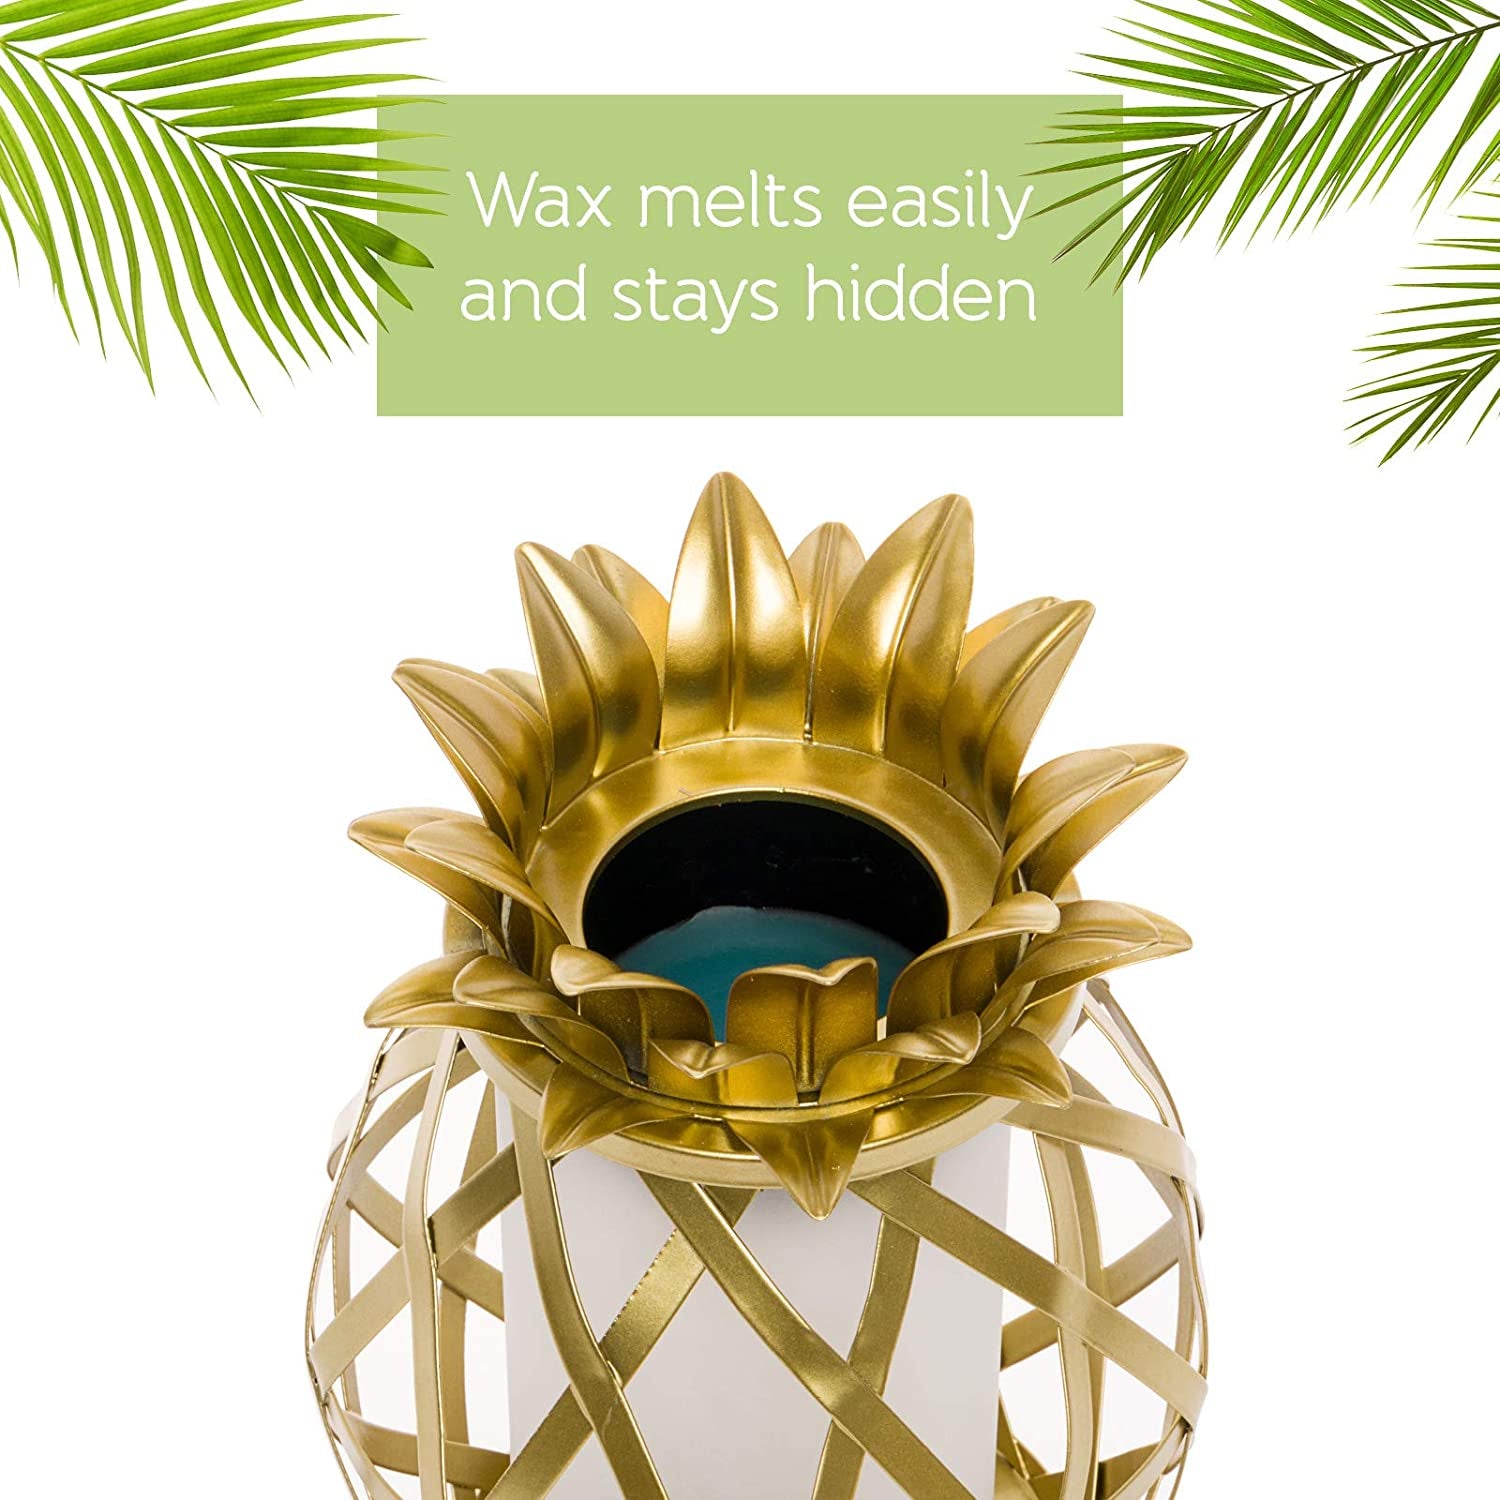 Professional Title: " Electric Golden Pineapple Wax Warmer for Scented Wax - Plug-in Melt Warmer - Ideal Stocking Stuffer for Holiday Season"